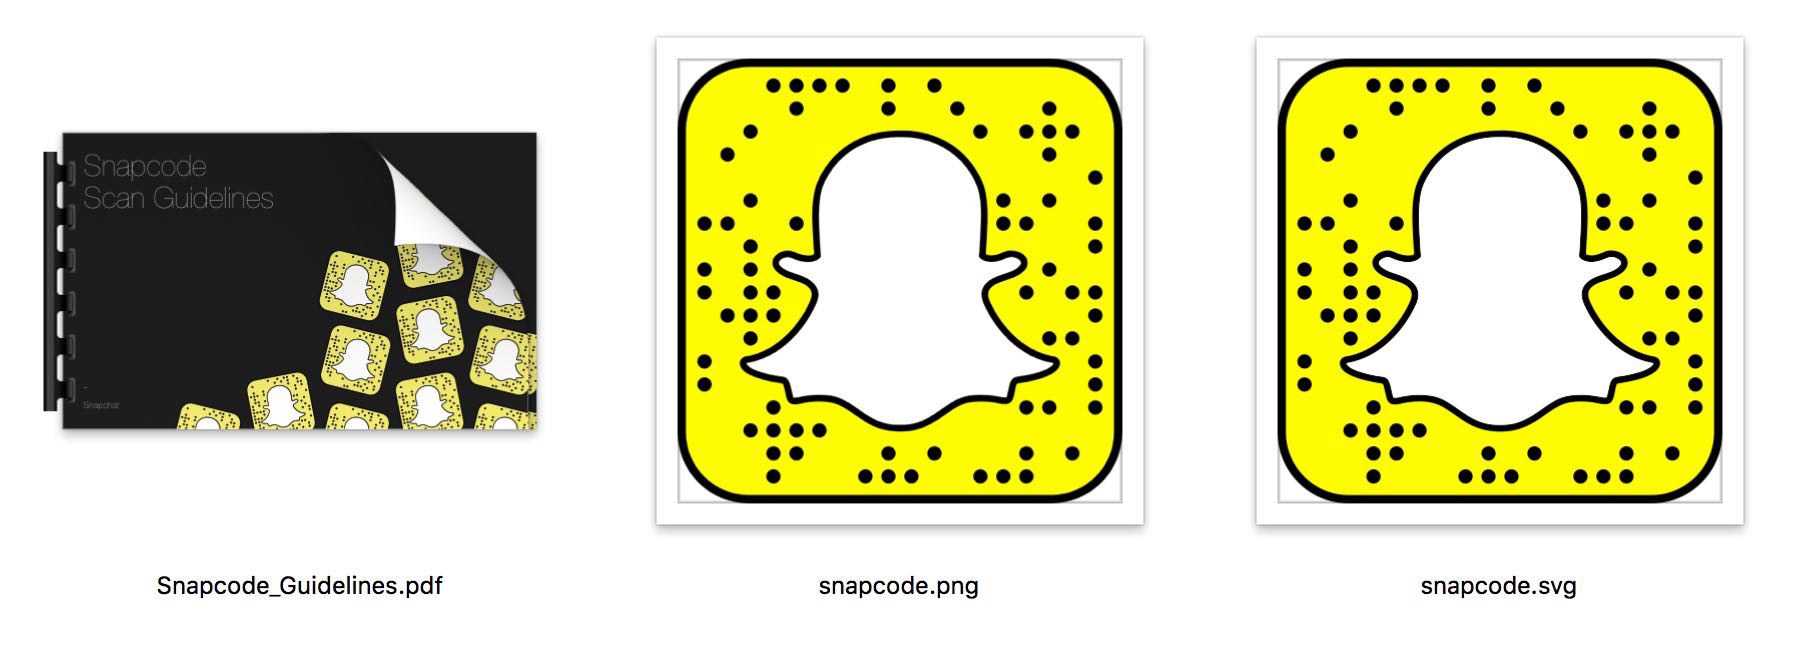 Snapcode Assets